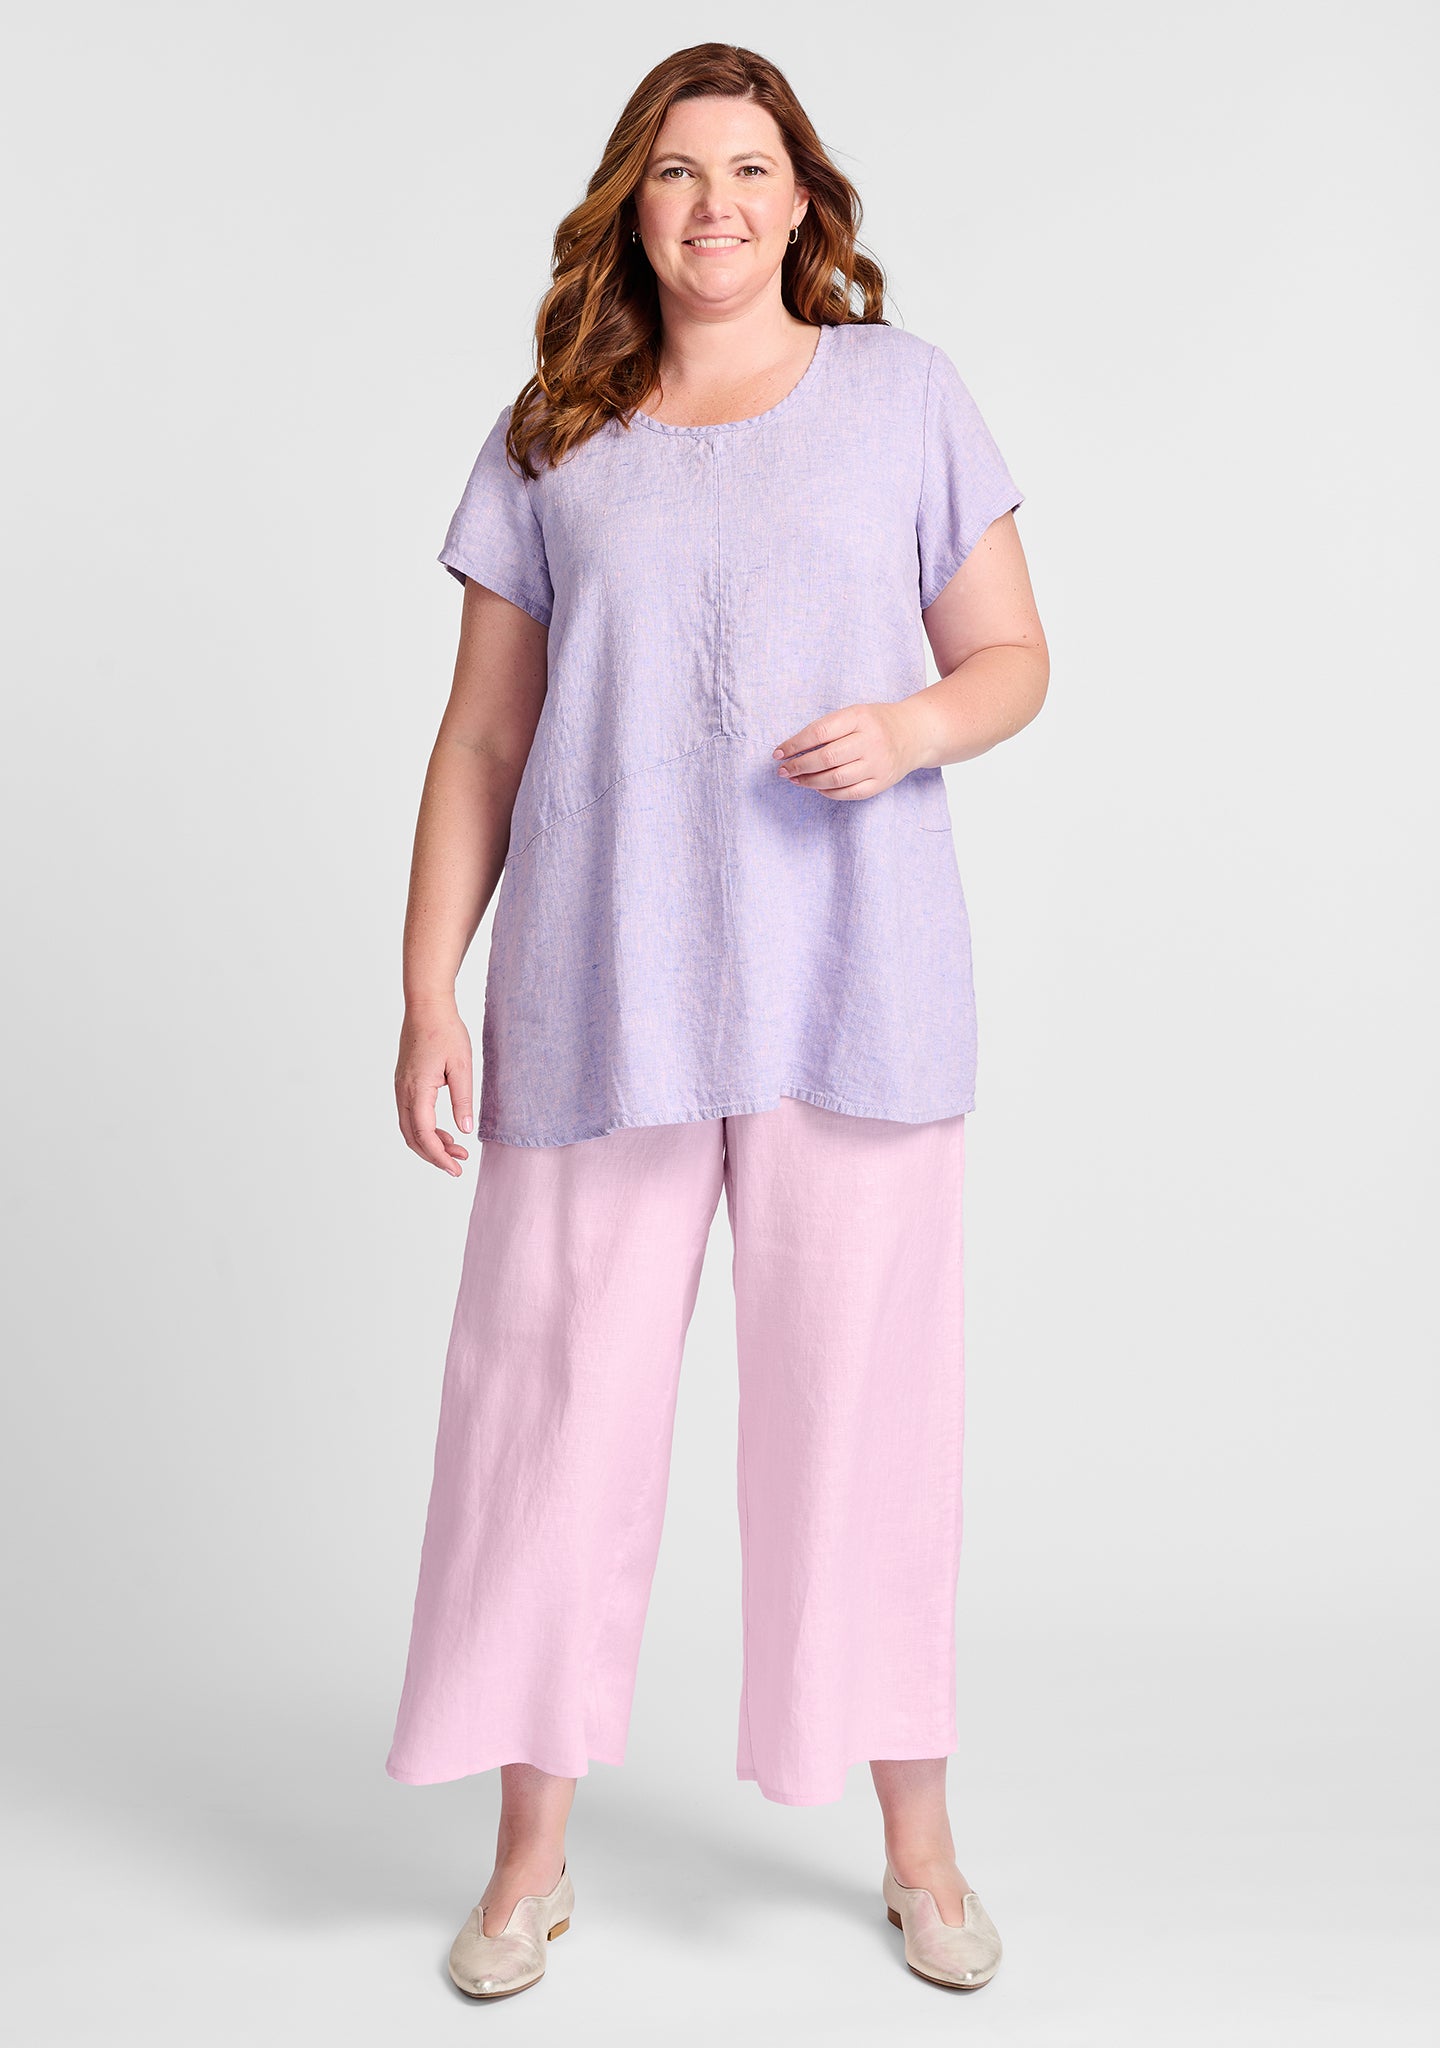 FLAX linen shirt in purple with linen pants in pink